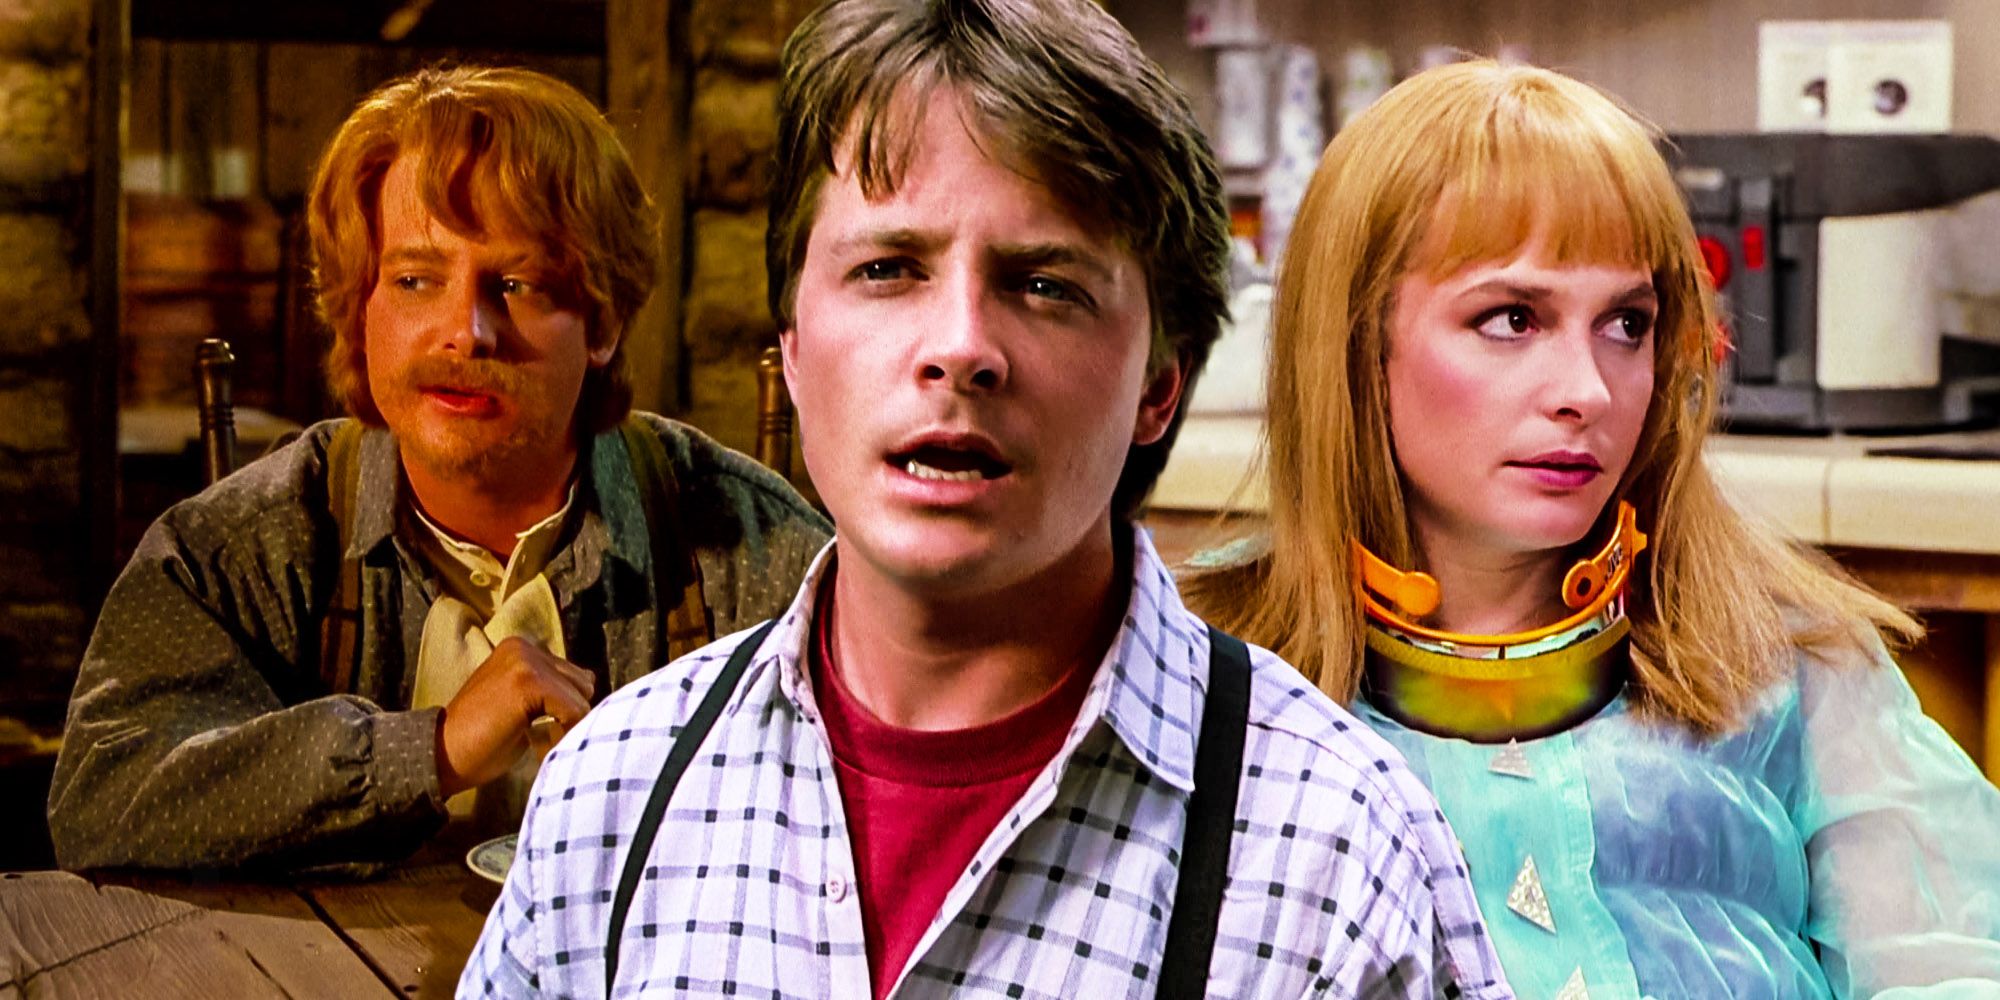 Every McFly Played By Michael J Fox In The Back To The Future Trilogy